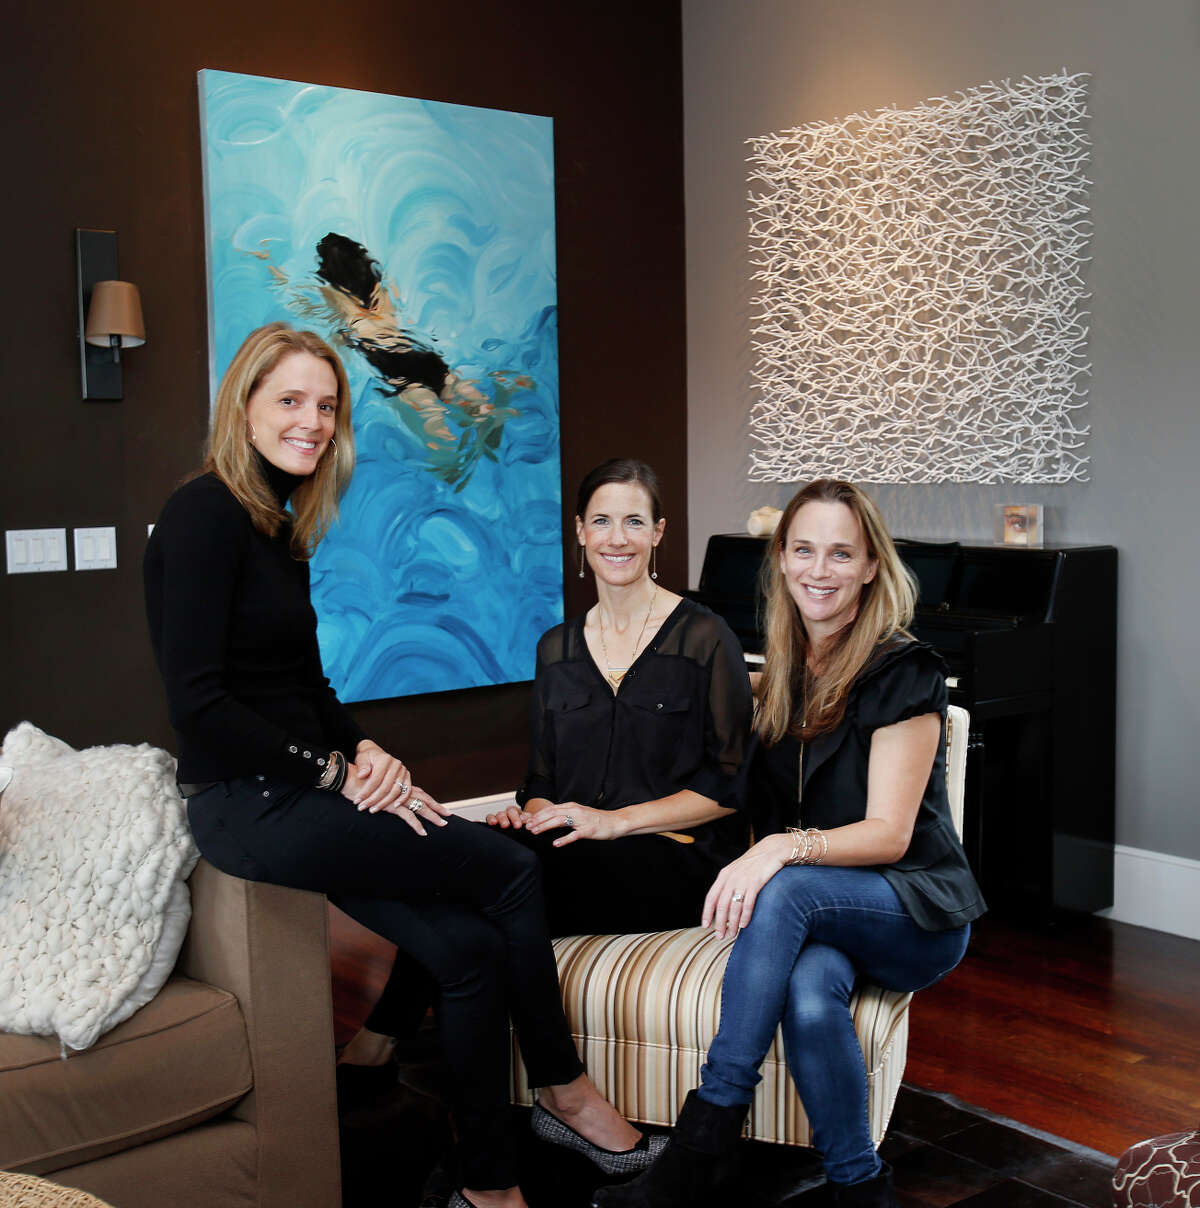 Art dealer Stephanie Breitbard (right) and colleagues Svea Lin Soll (center) and Eve Simon in Breitbard’s Mill Valley home, which is also an art gallery. In the background are a painting of a swimmer by Benjamin Anderson and a sculpture by Matt Devine.